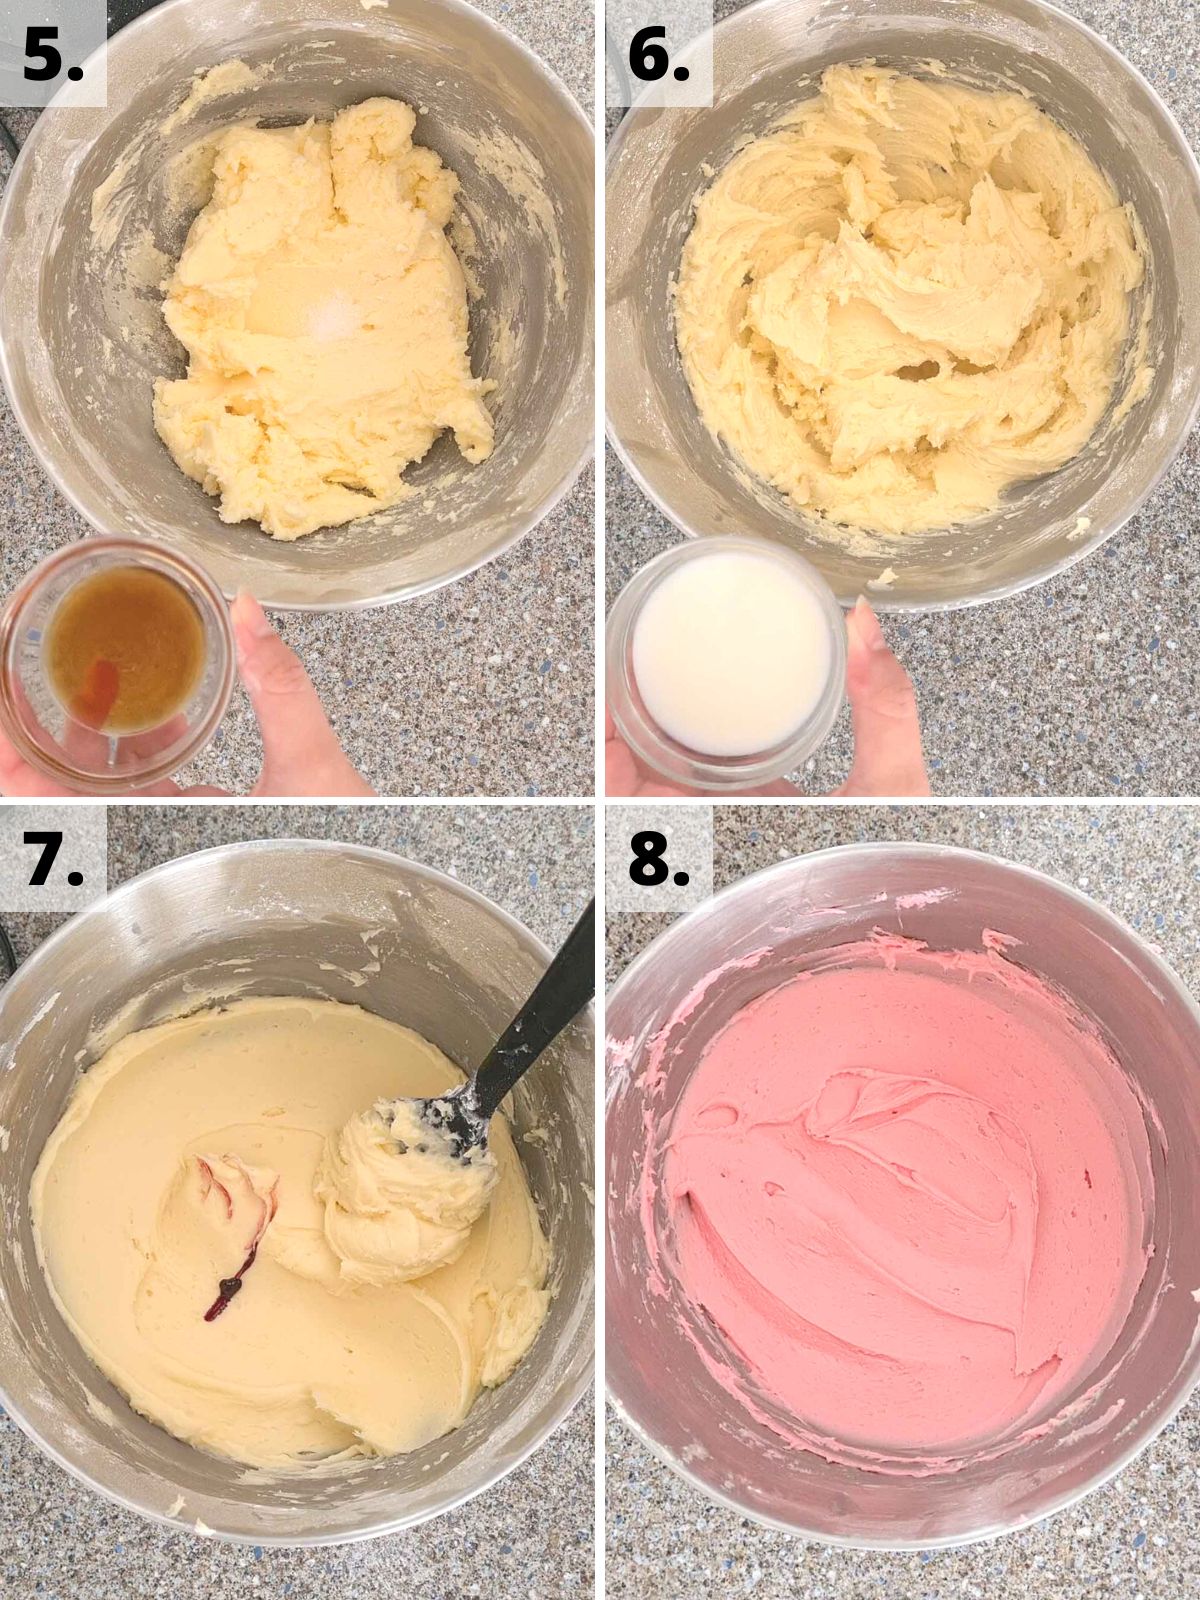 steps 5 to 8 for how to make pink buttercream.